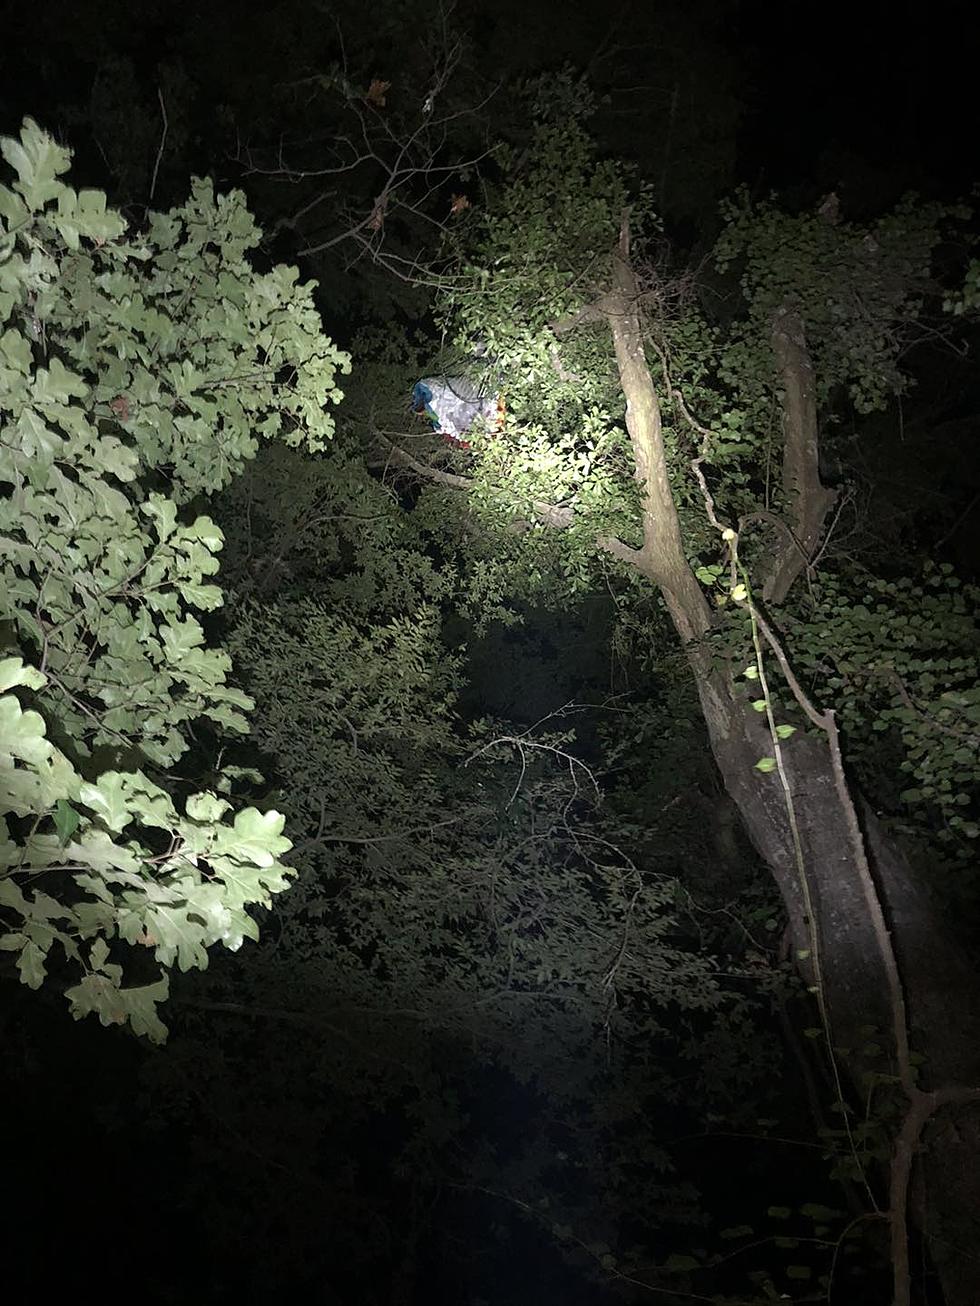 Louisiana Paraglider Crashes Into Tree, Has to Be Rescued by Fire Department